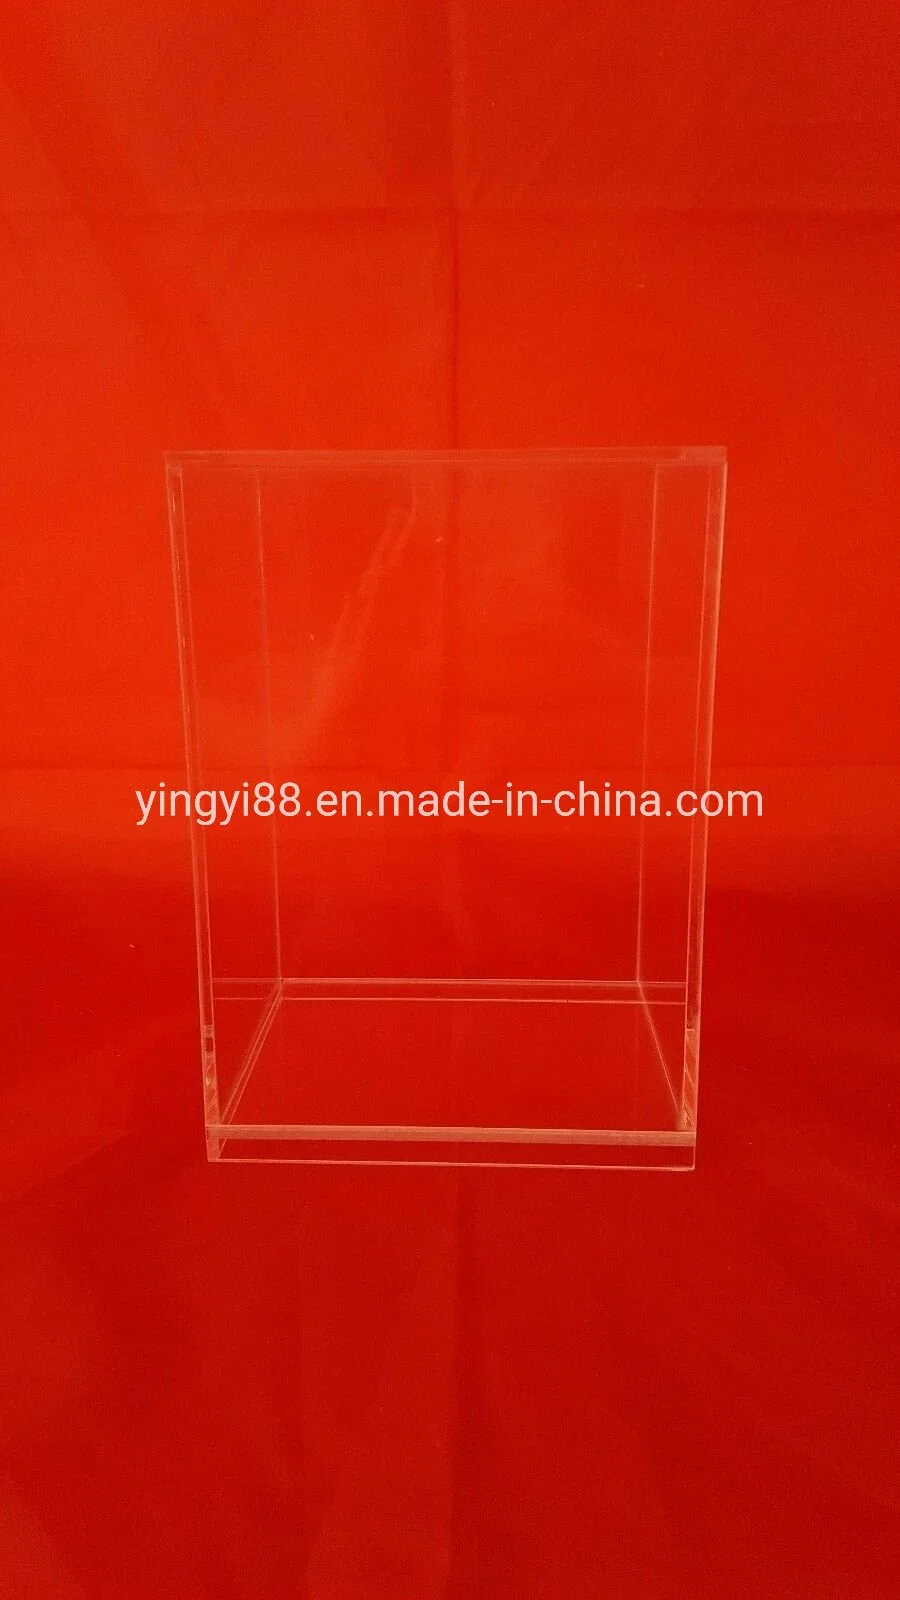 Custom Stackable Clear Acrylic Sliding Hard Funko Pop Box Protector for Video Game Collectibles